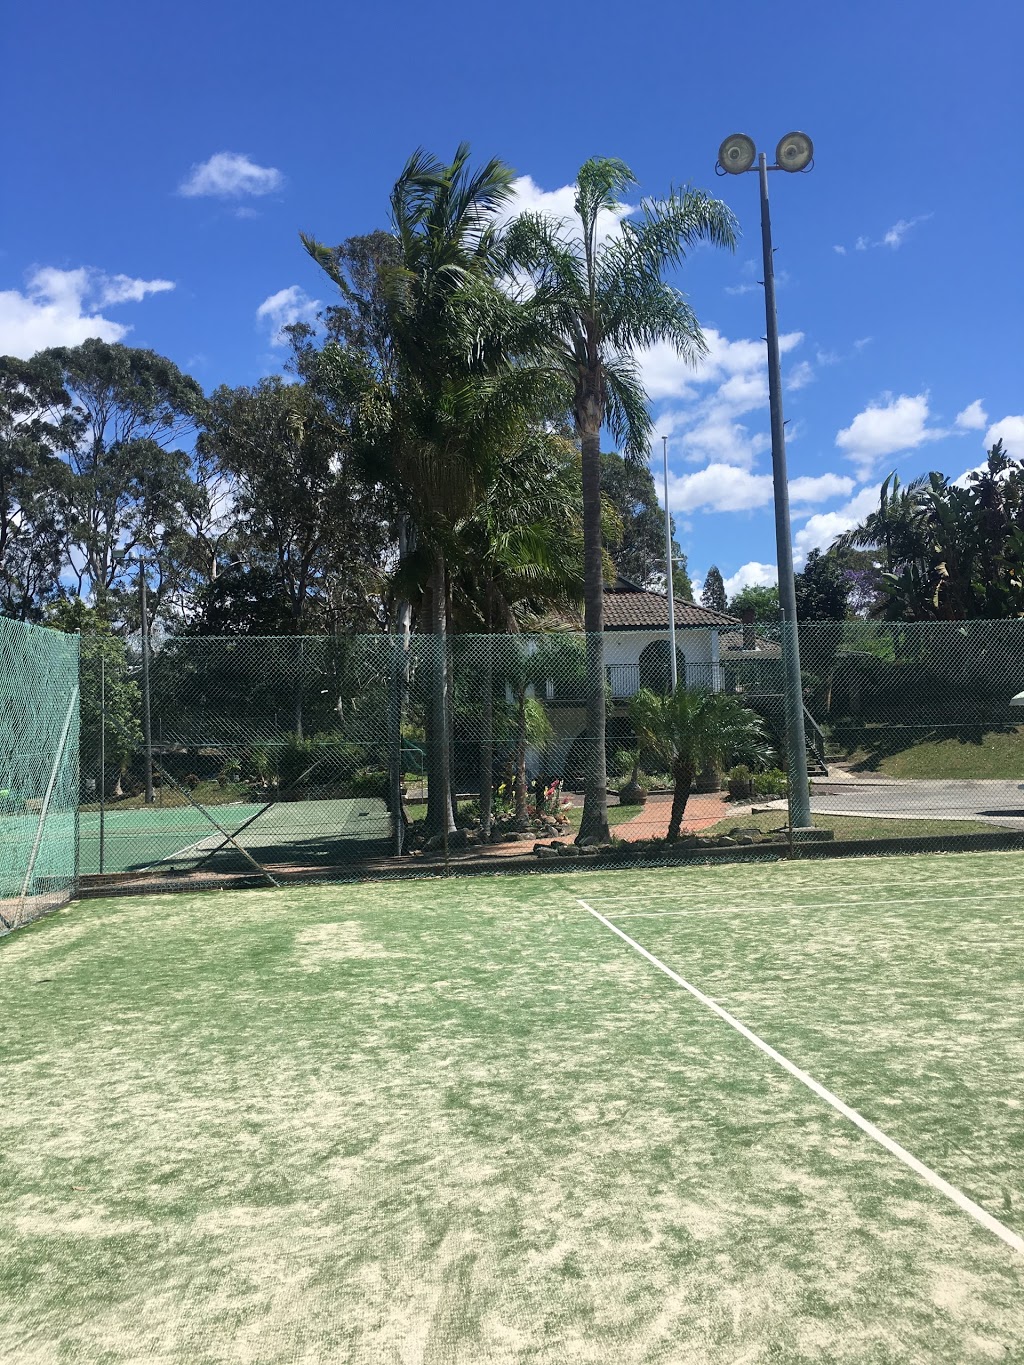 Aces Tennis Figtree | store | 5- 7 Obriens Rd, Figtree NSW 2525, Australia | 0242286398 OR +61 2 4228 6398